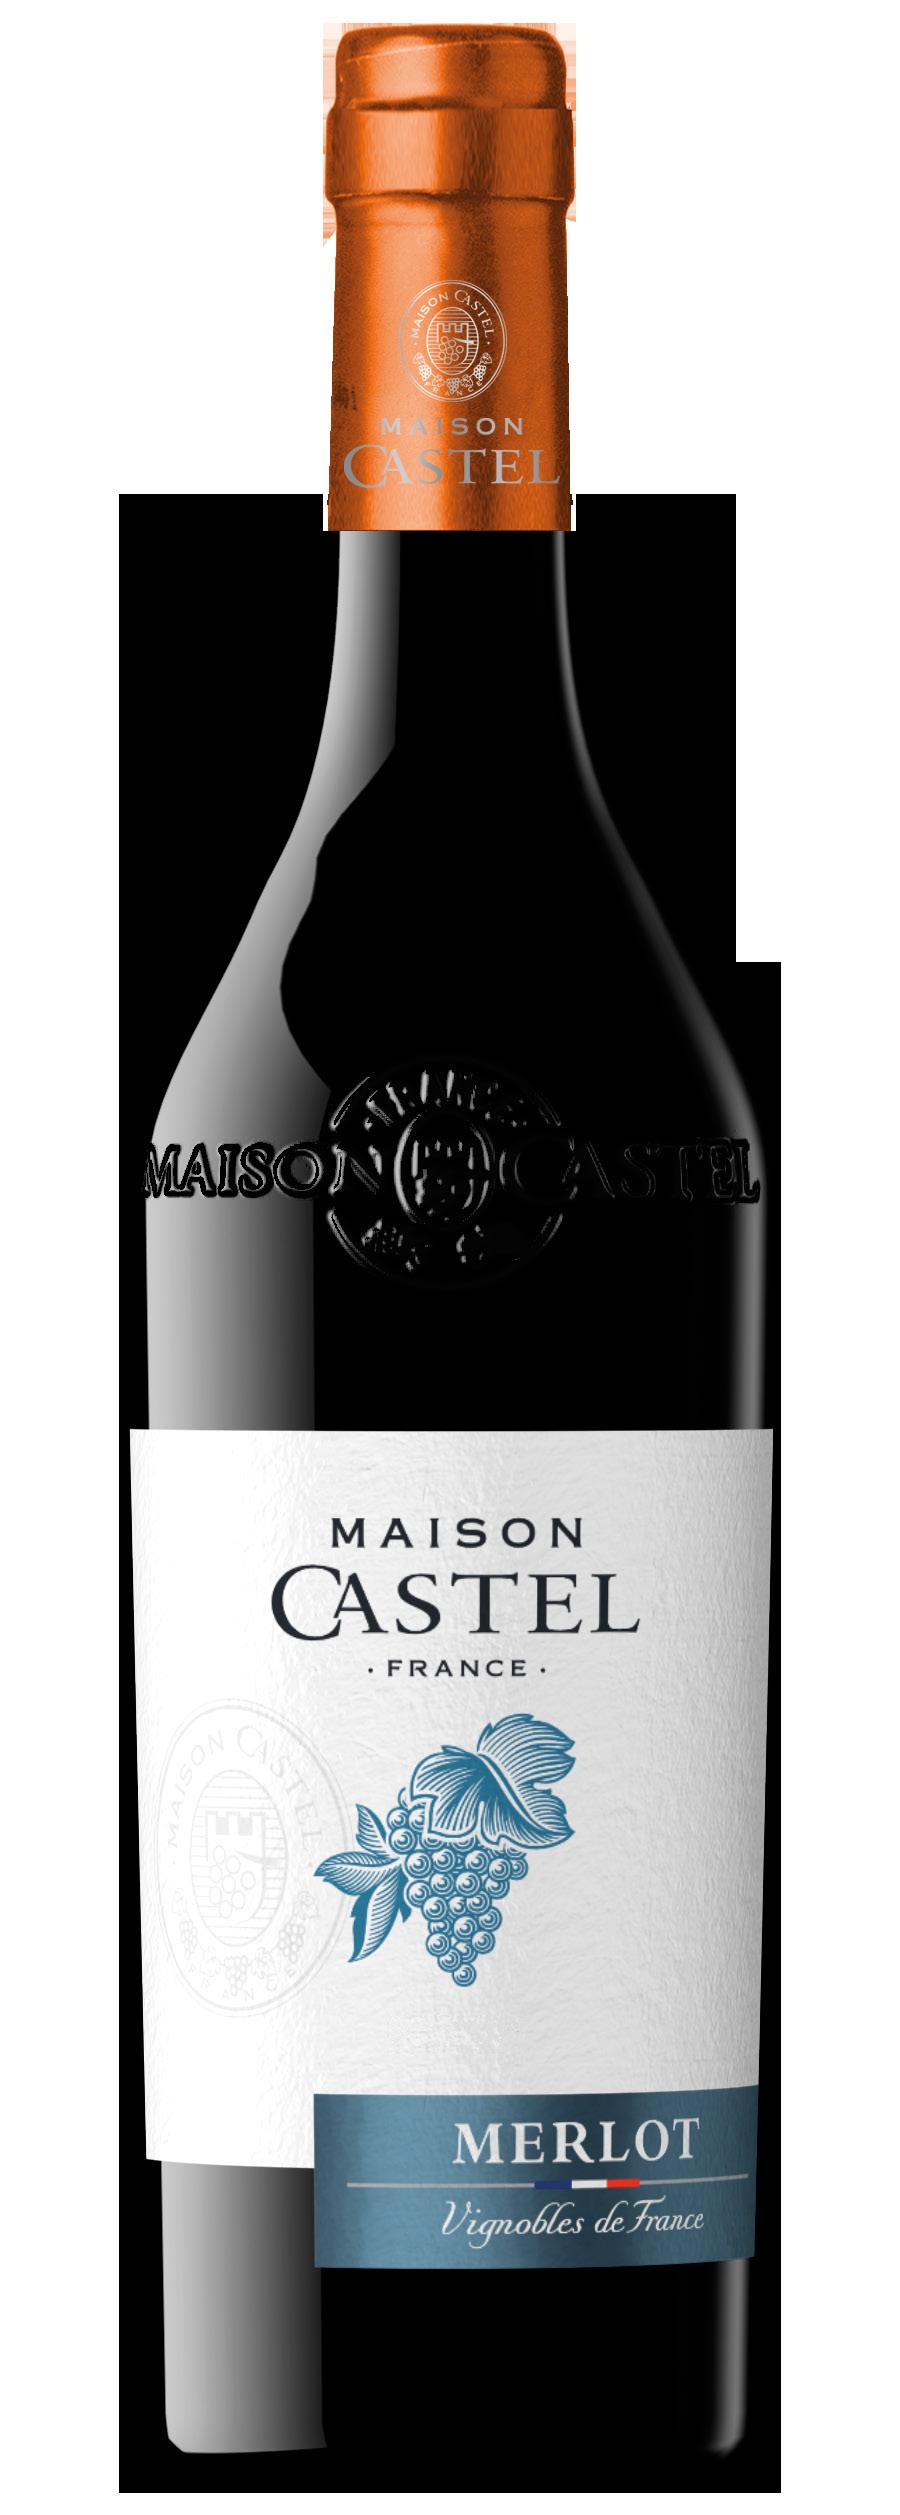 Maison Castel Merlot This Merlot is designated a Pays d Oc Protected Geographical Indication wine.